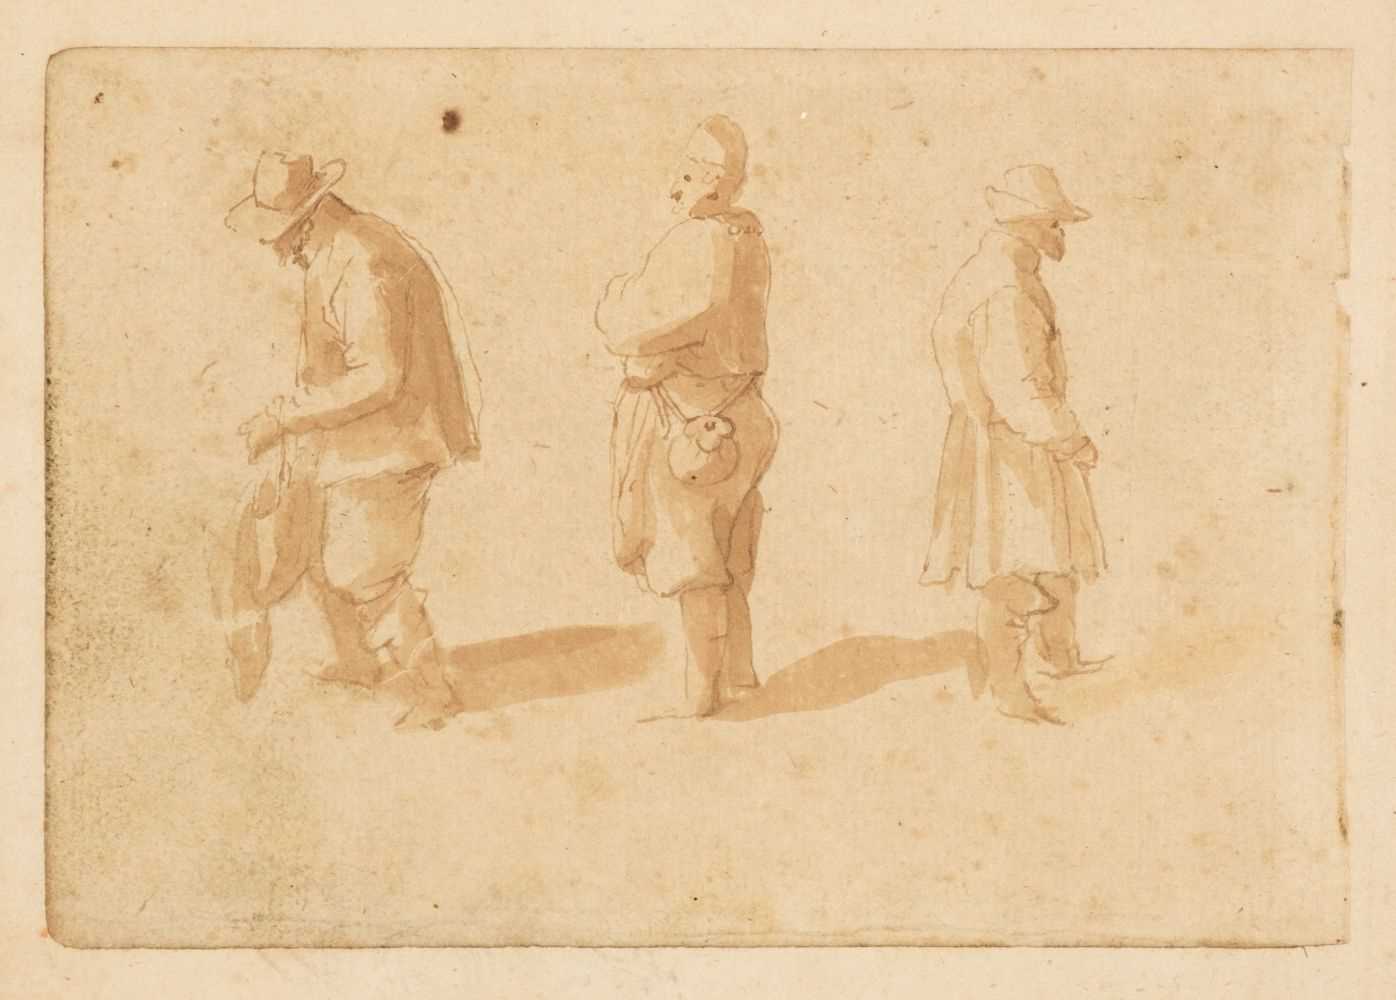 Lot 310 - Breughel (Jan, 1568-1625). Three Peasants, probably late 16th or early 17th century